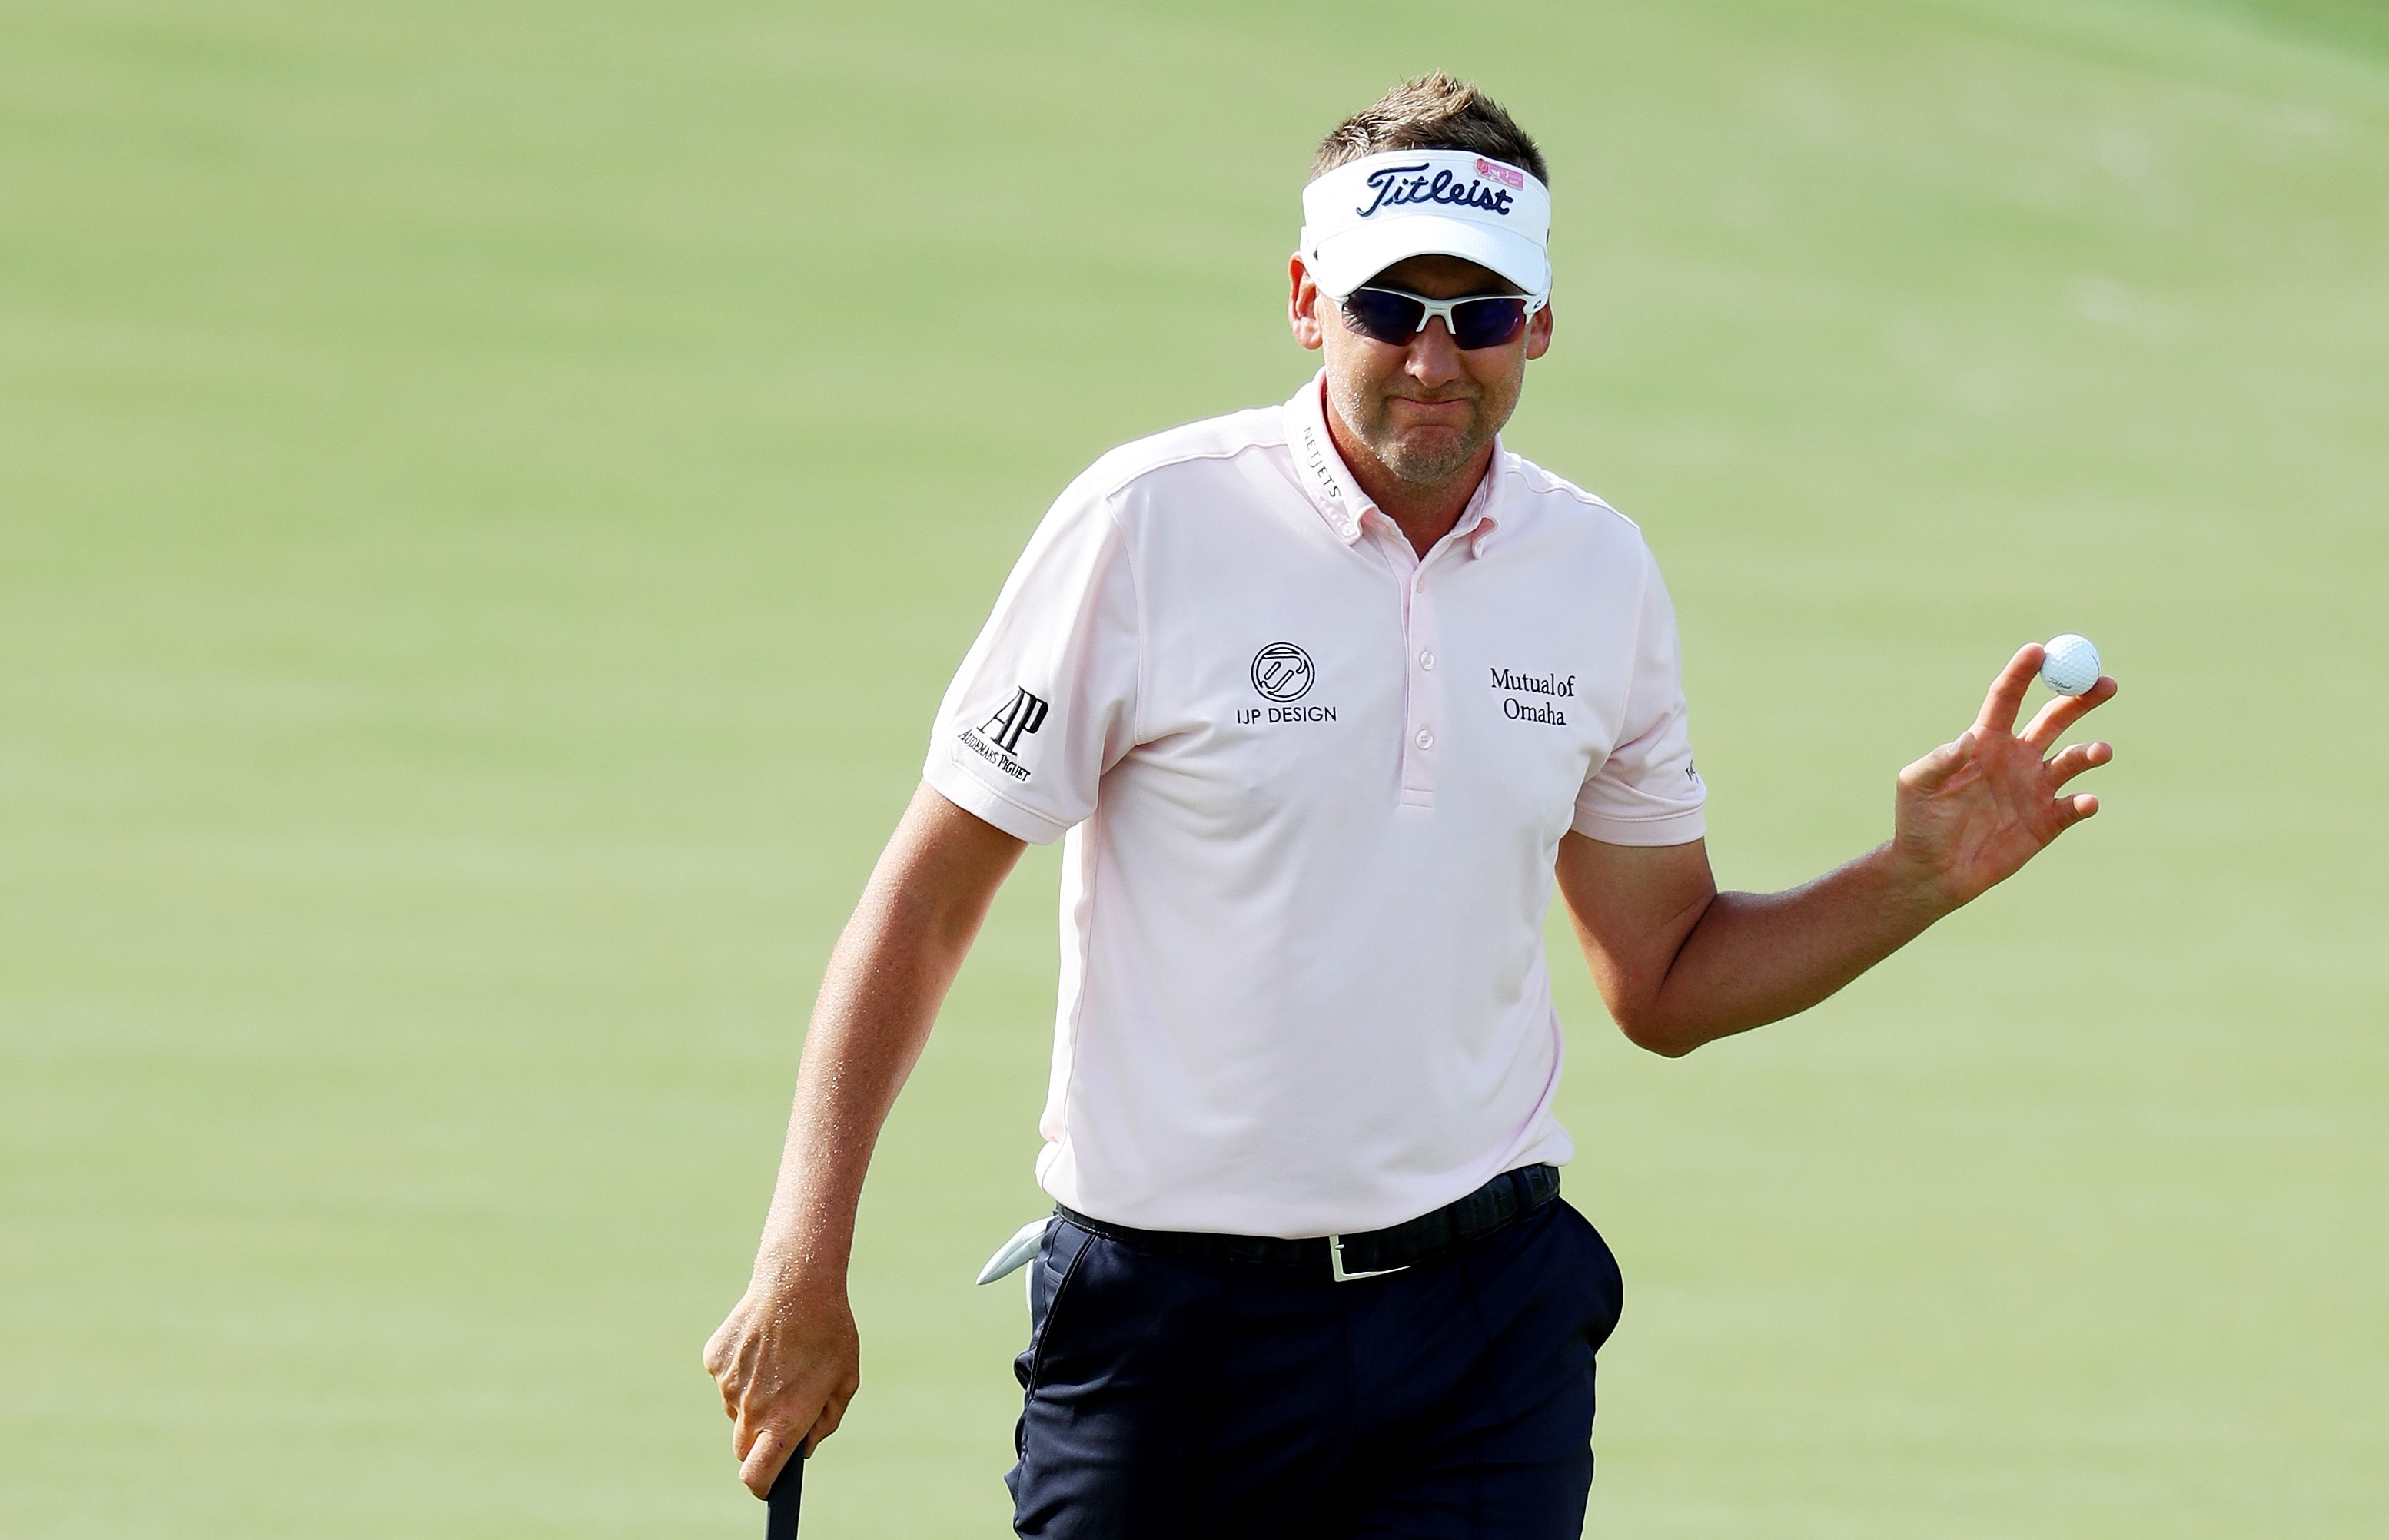 Today at the Players: It was Kim's title, but Poulter stole the show